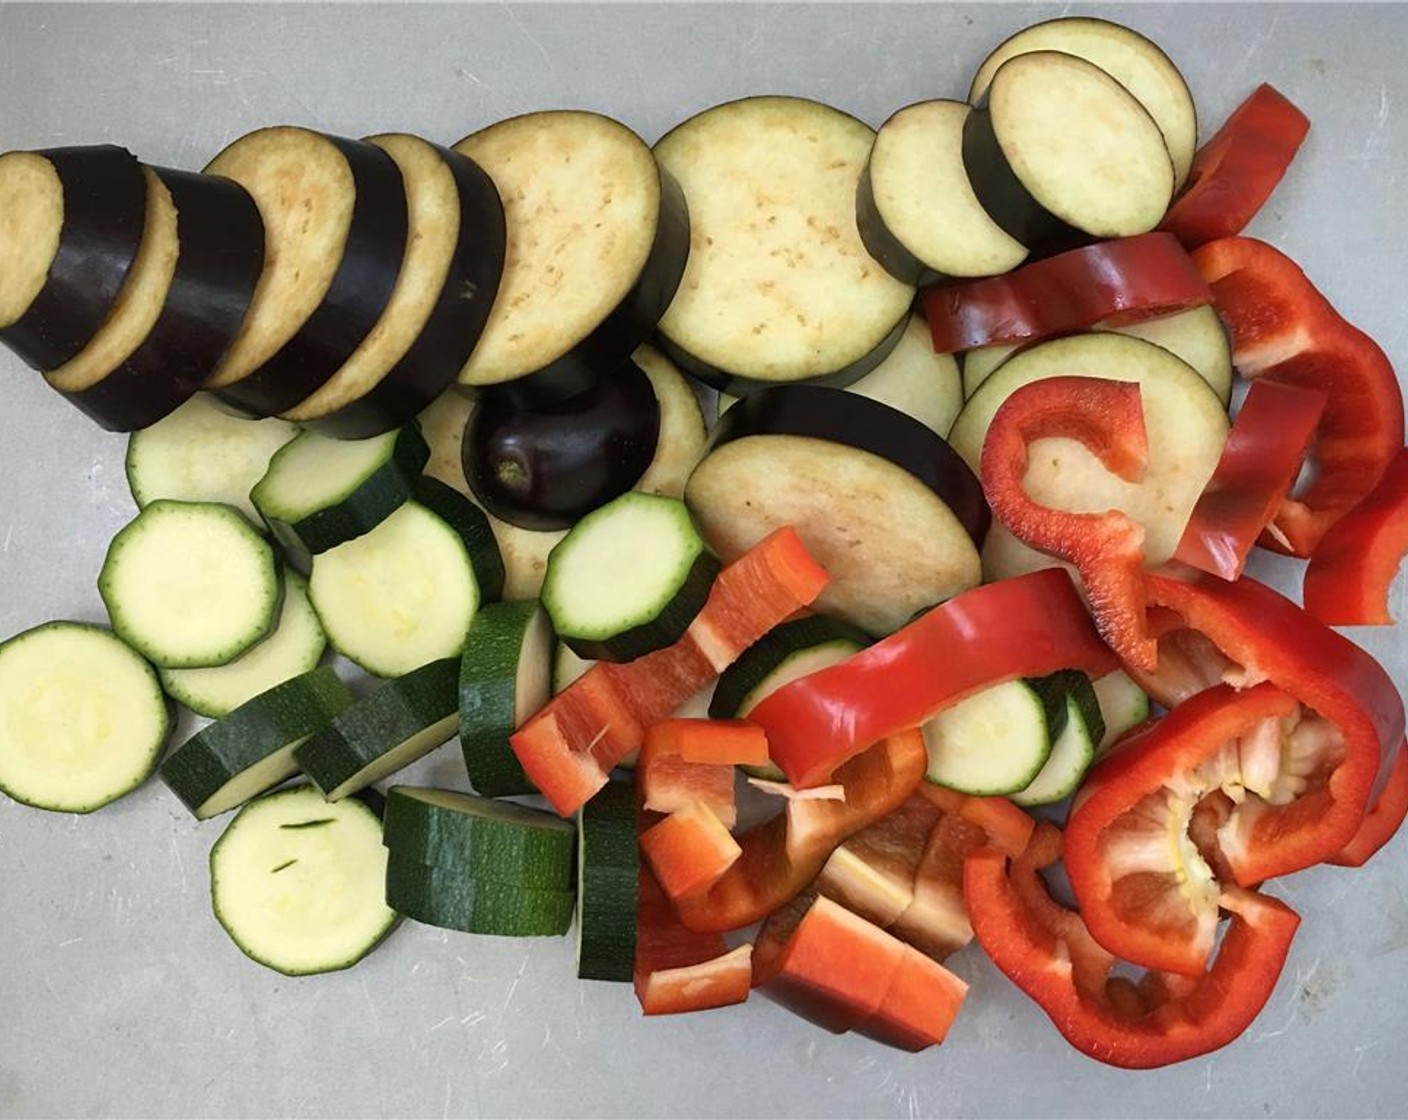 step 2 Rinse the Eggplant (1), Zucchini (1), Red Bell Pepper (1) and slice them into 1/2 inch (1 cm) thick bits.